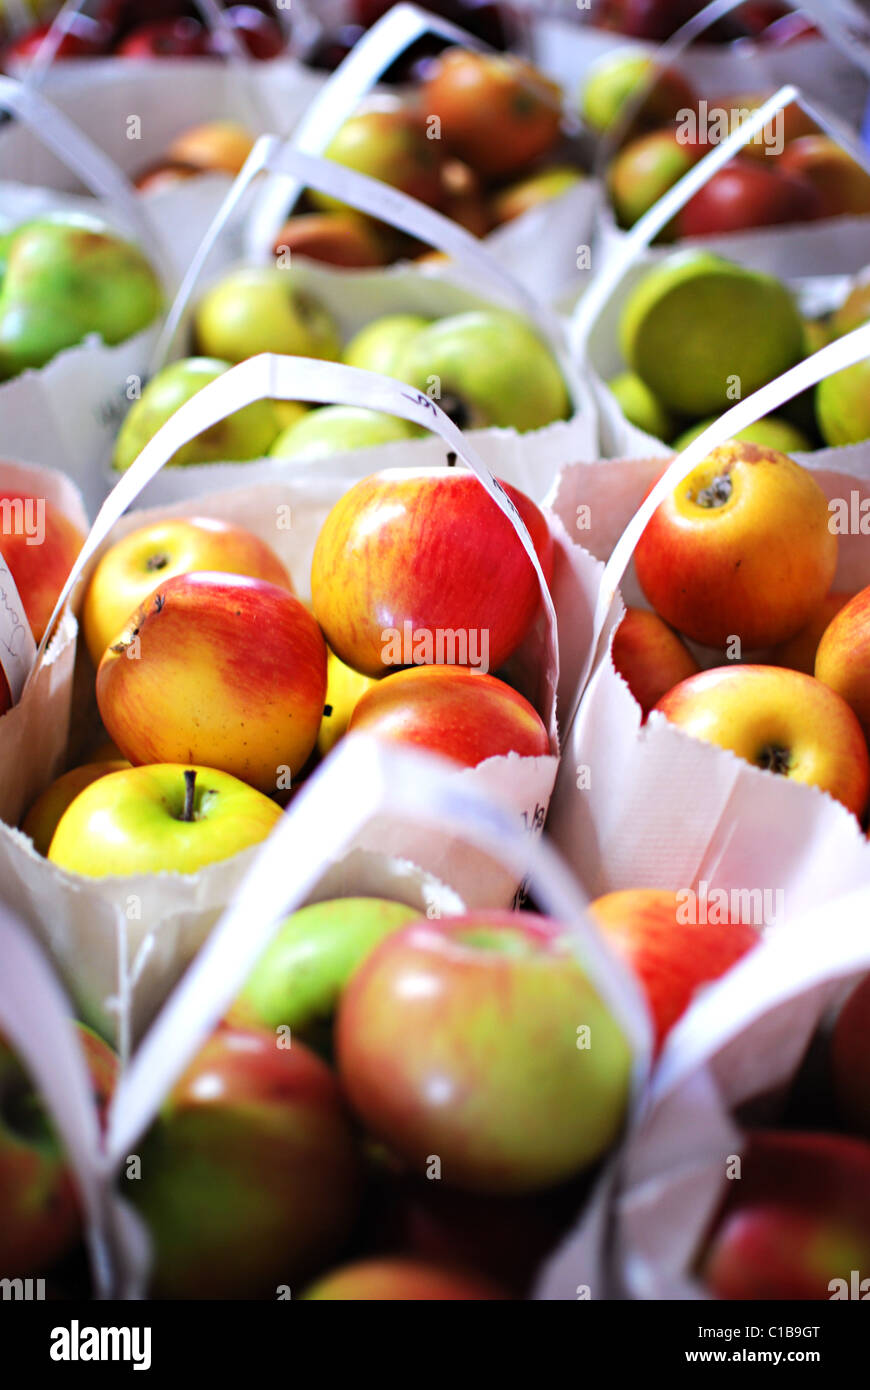 Apples for sale in bags at a local farmers market. Stock Photo